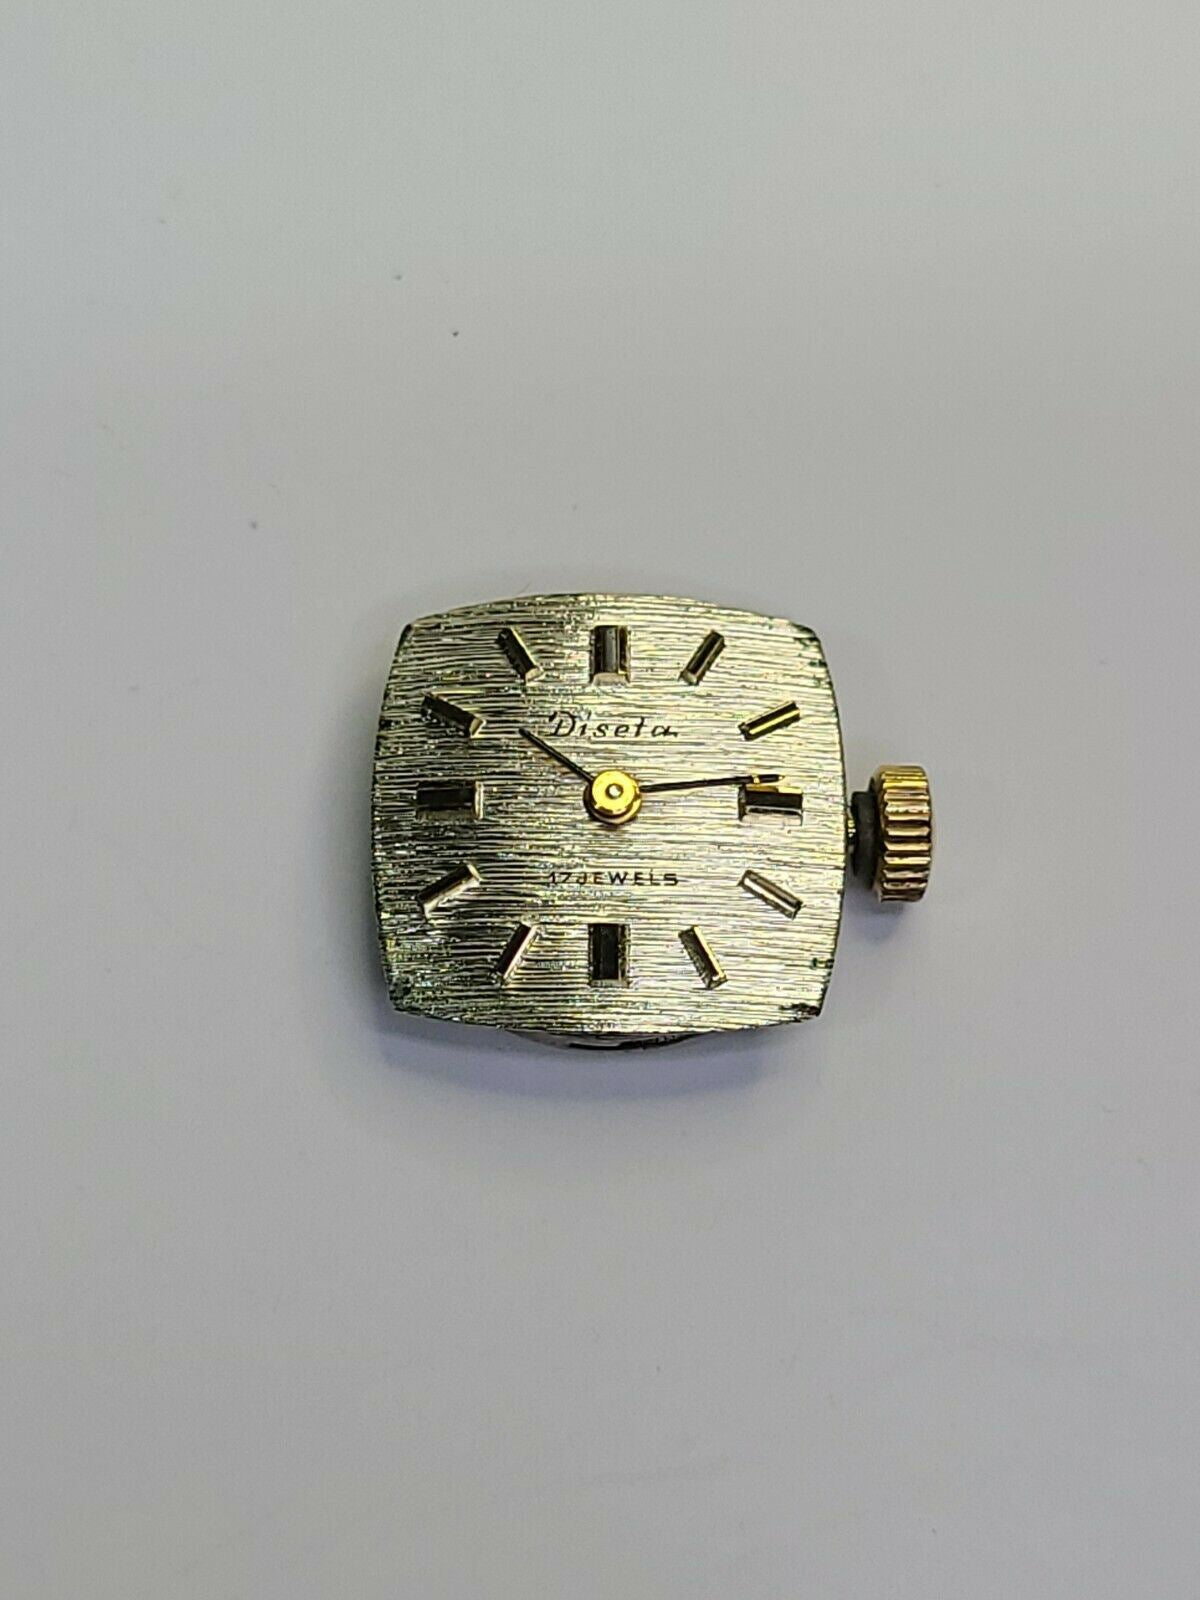 ETA 2442 Diseta Watch Movement 17 Jewels with dial and hands